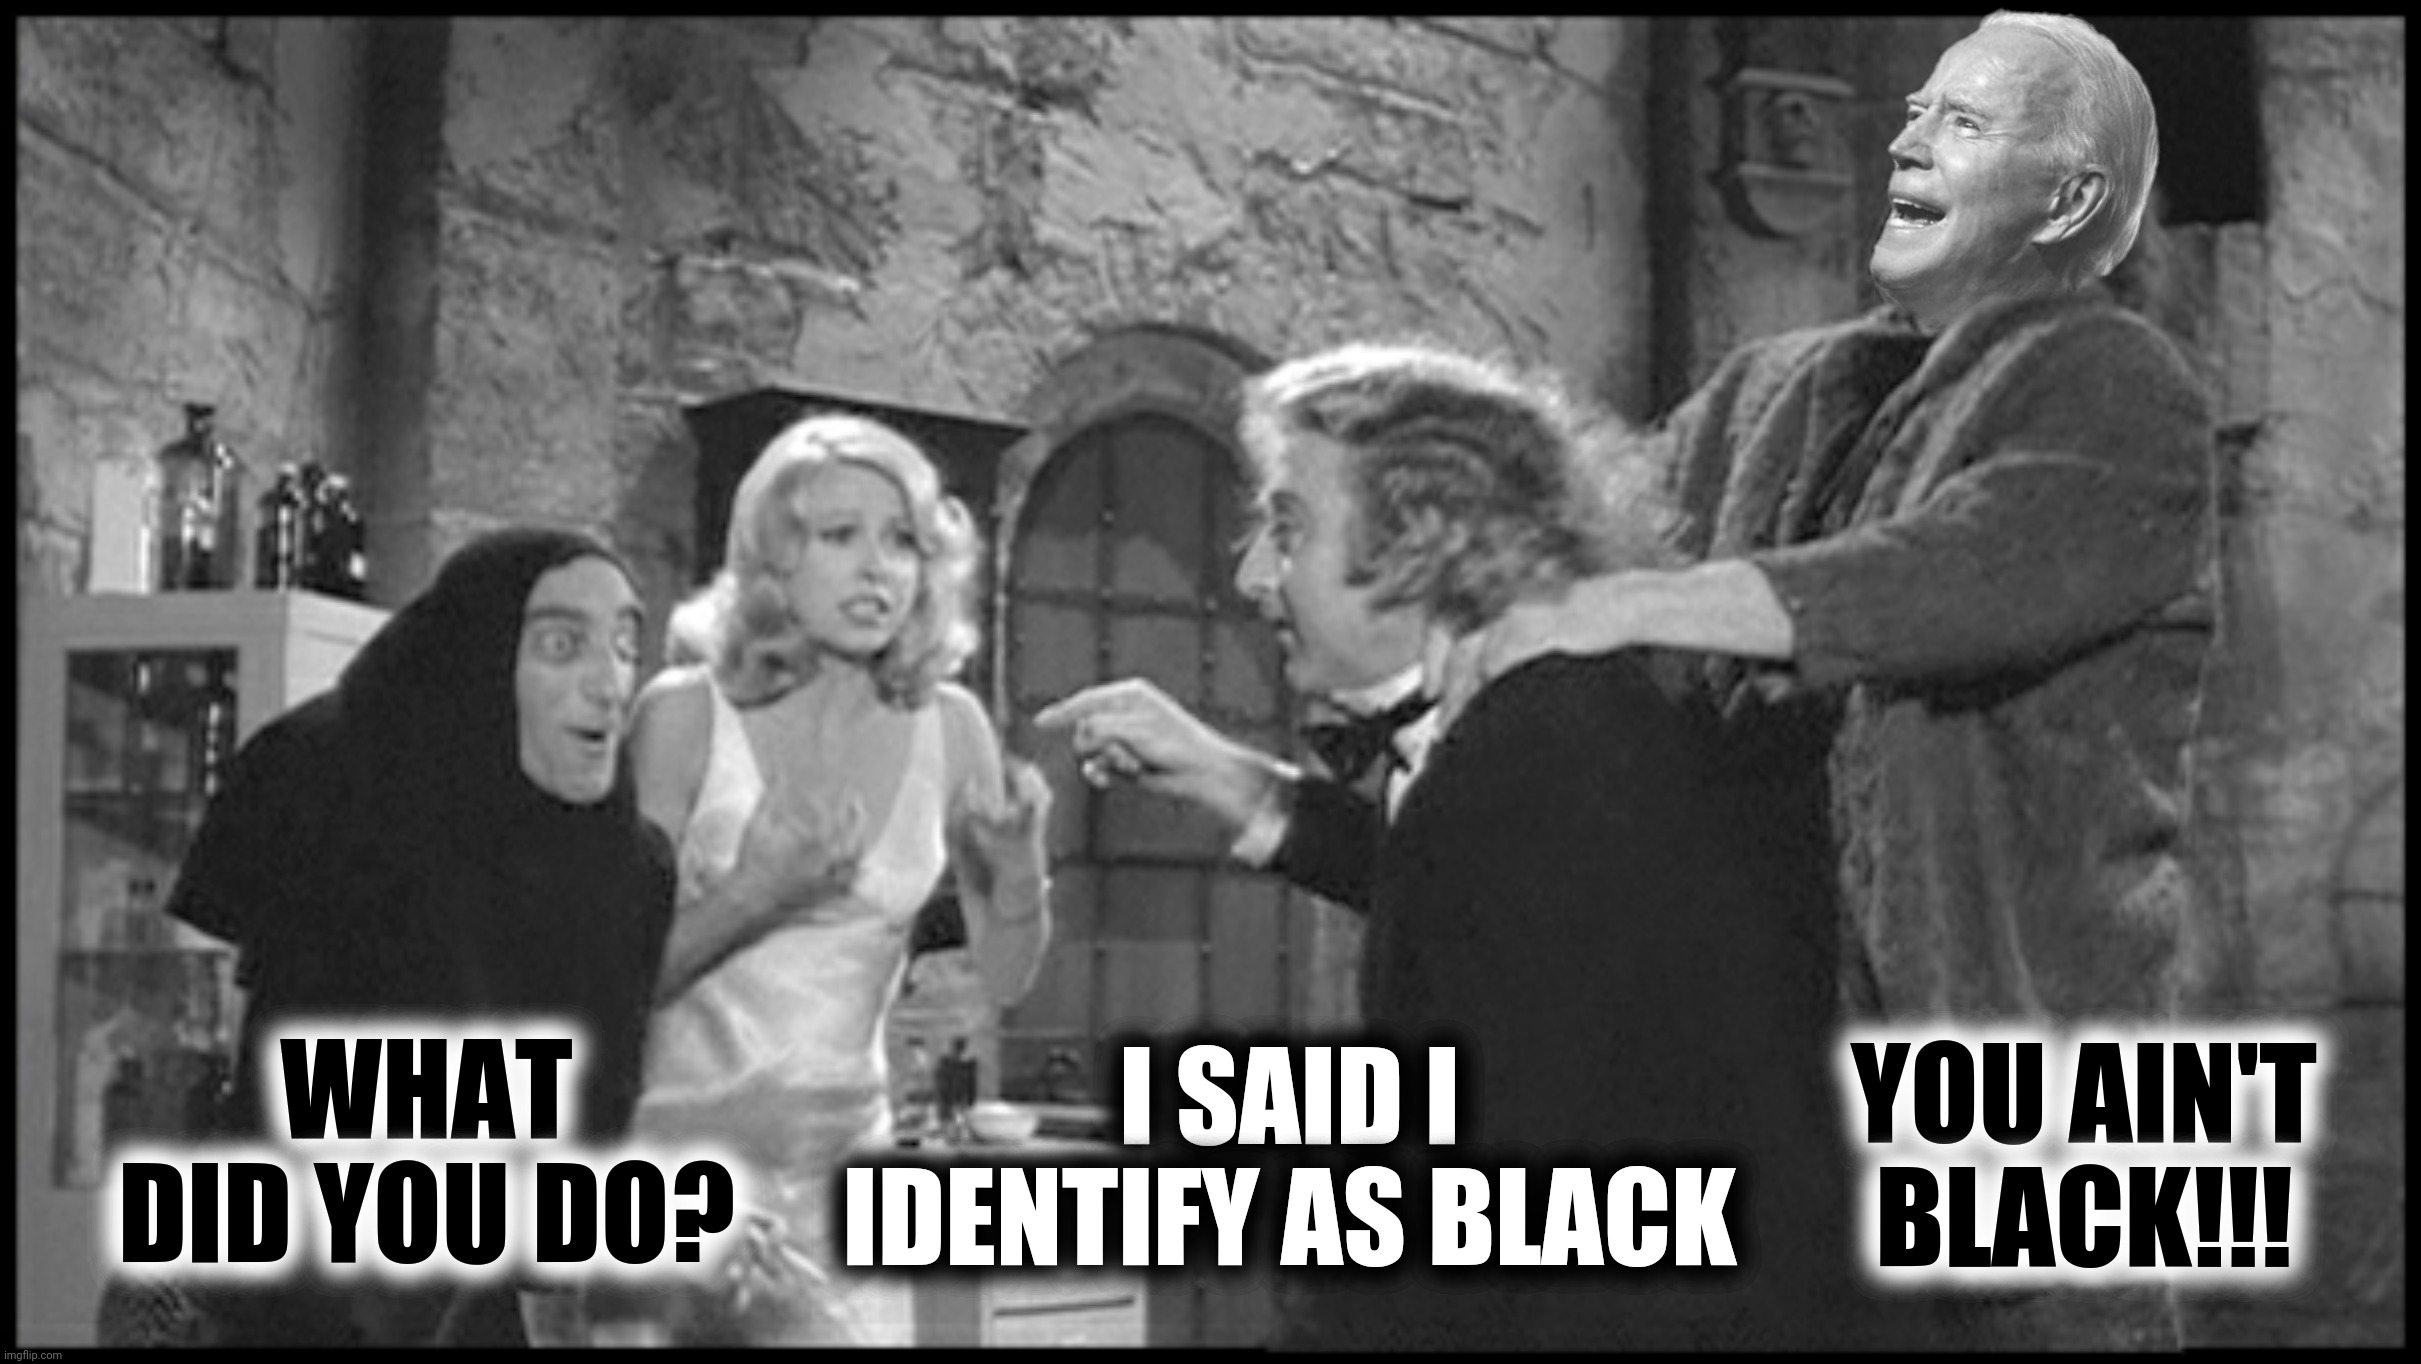 Bad Photoshop Sunday presents:  The Bide Of Frankenstein | WHAT DID YOU DO? YOU AIN'T BLACK!!! I SAID I IDENTIFY AS BLACK | image tagged in bad photoshop sunday,young frankenstein,joe biden,you ain't black | made w/ Imgflip meme maker